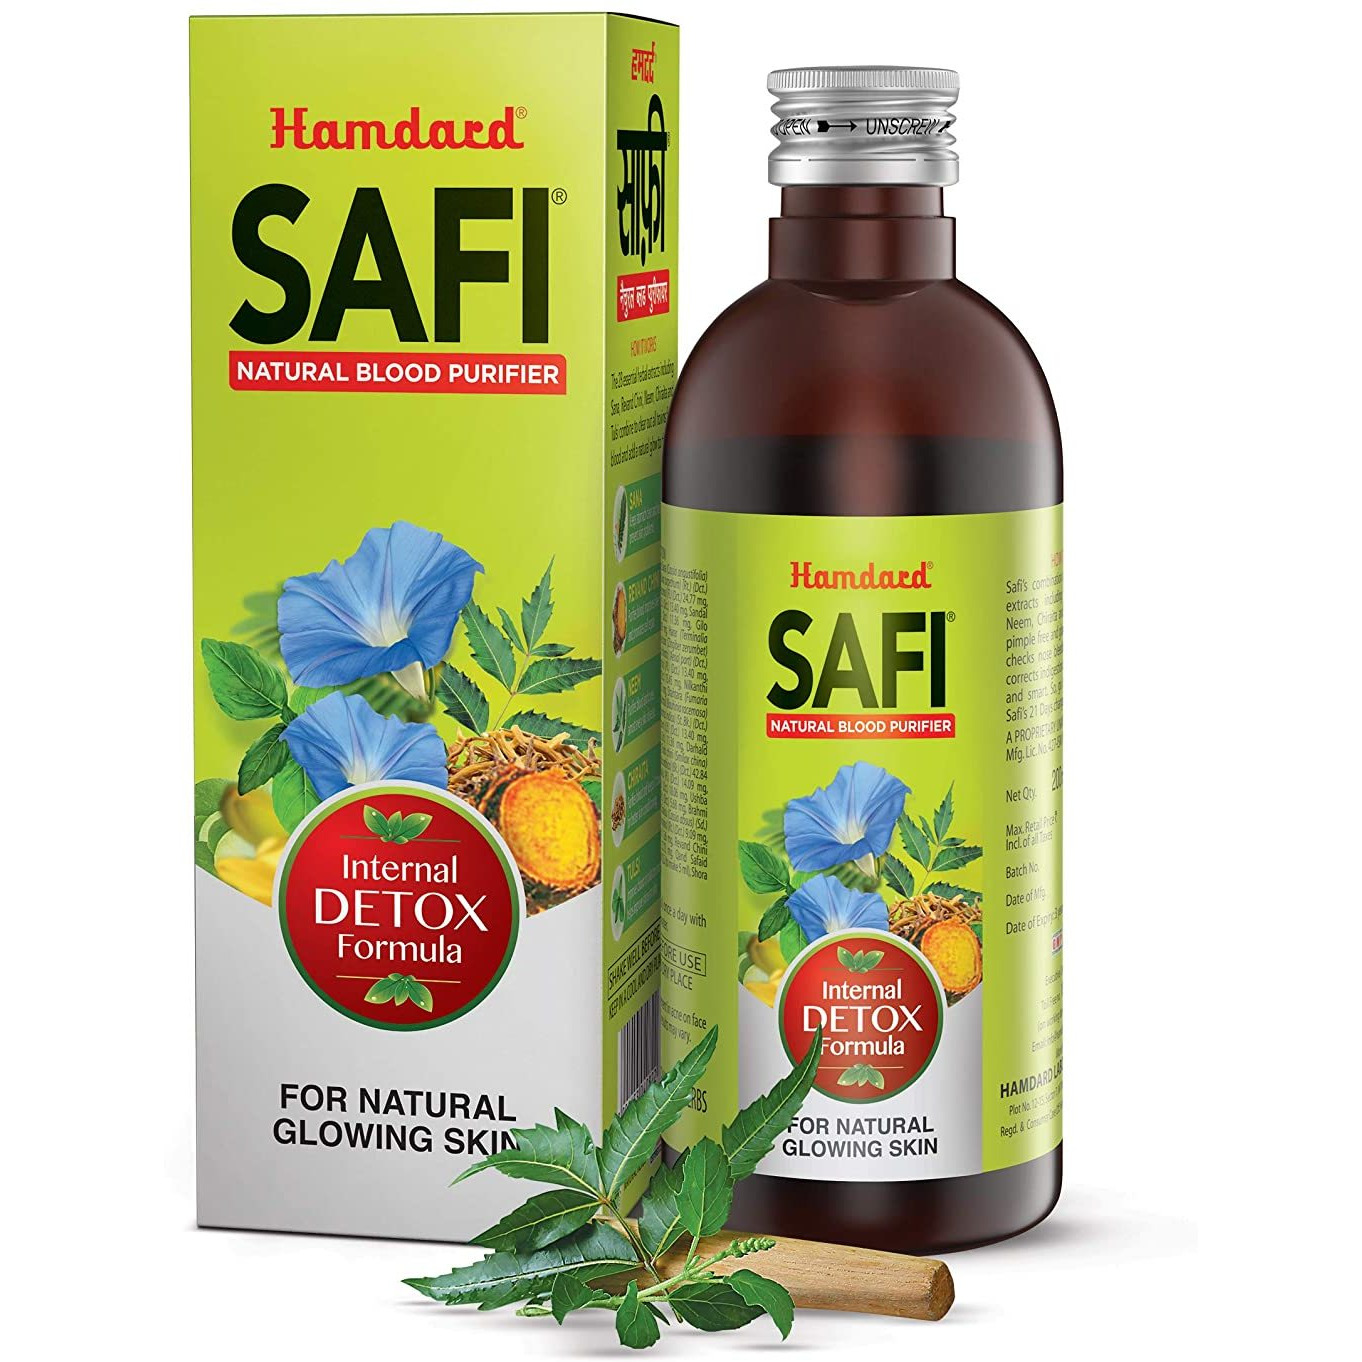 Hamdard Safi Syrup Fda Approved Herbal For Blood Purifier & Acne - 500 ml